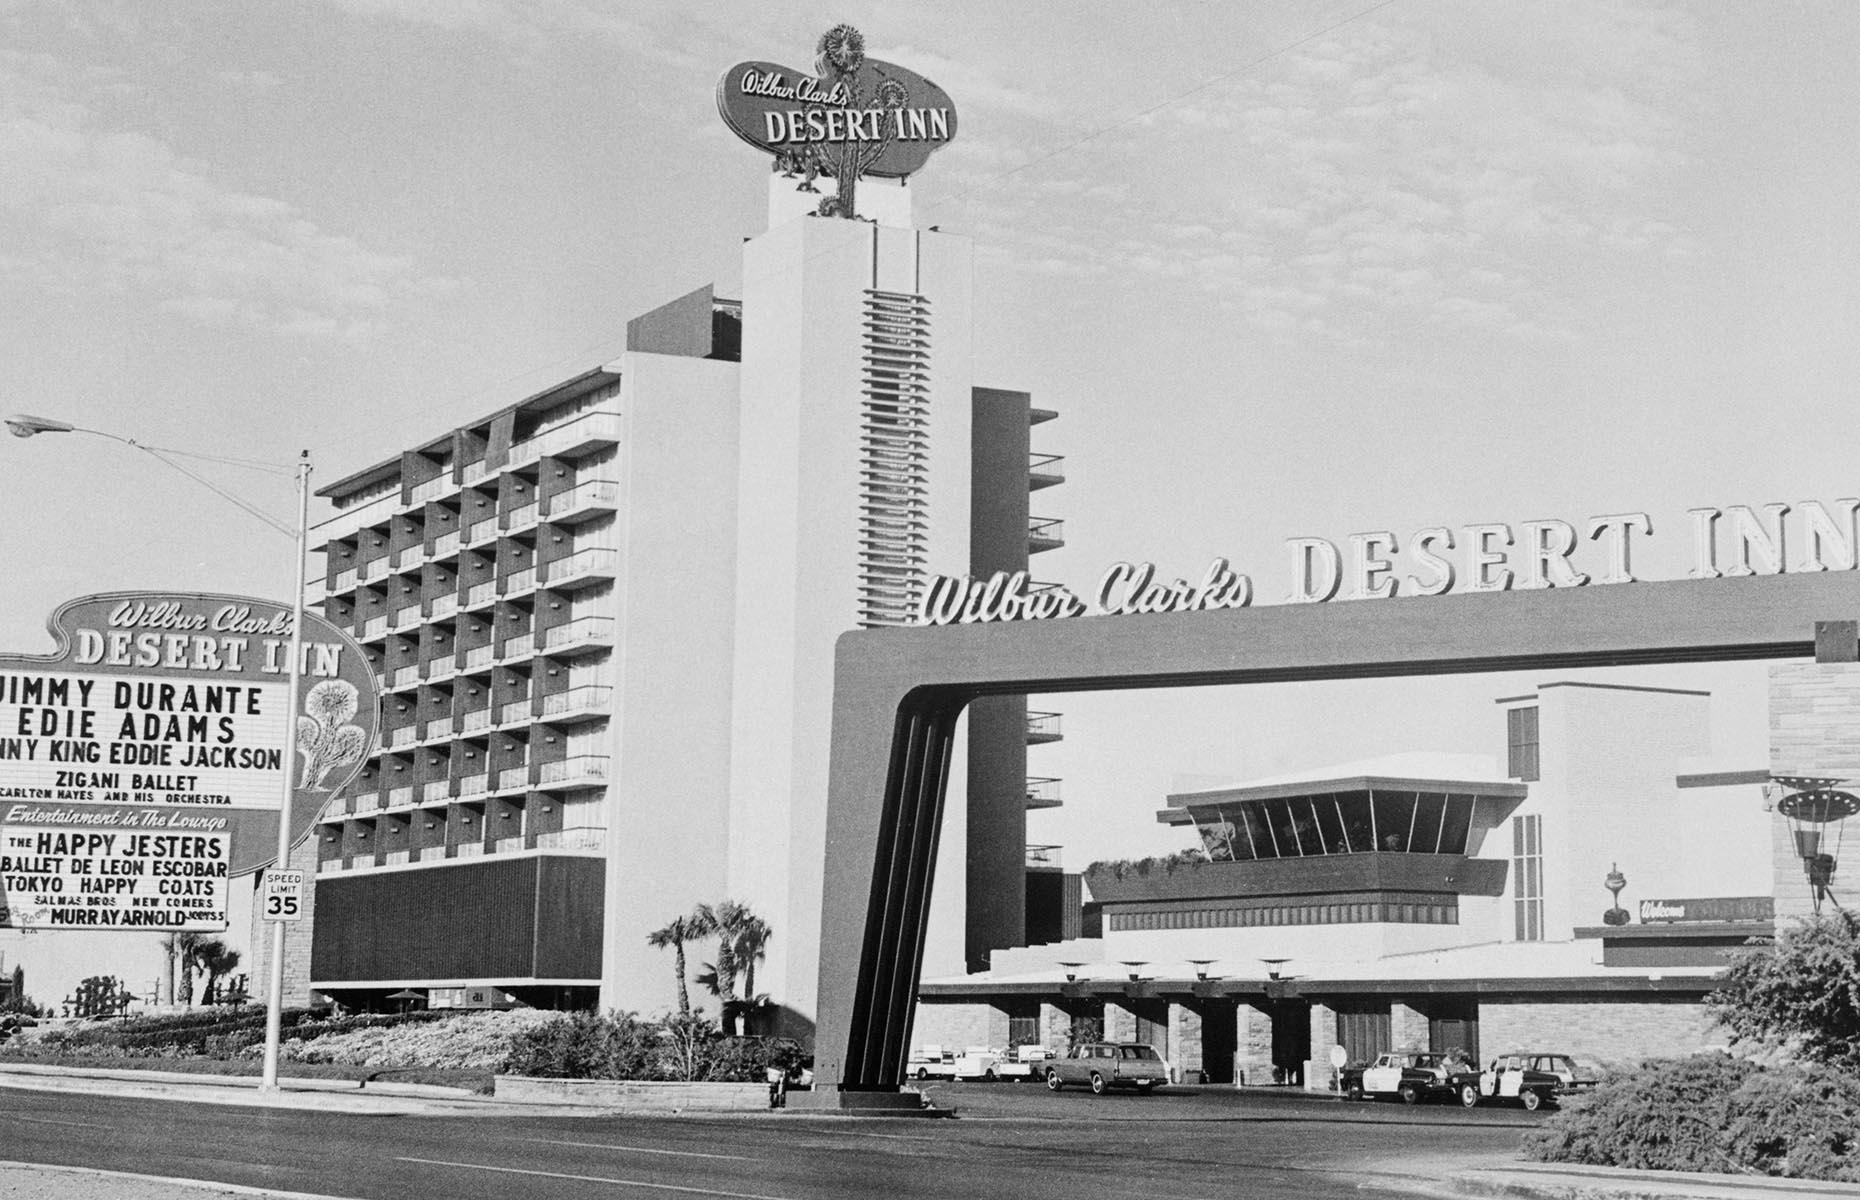 Slide 21 of 34: A business magnate from Texas, Howard Hughes began a buying spree after overstaying his booking at the Desert Inn (pictured). Unwilling to leave, he started negotiations and eventually bought the hotel. During the 1960s he went on to purchase the Desert Inn, the Sands, Frontier, Silver Slipper, Castaways and Landmark. Hughes was instrumental in changing Las Vegas' image from its Wild West roots to a refined cosmopolitan city with numerous remodelings and multi-story additions. His business model paved way for corporate ownership of hotel-casinos so common today.